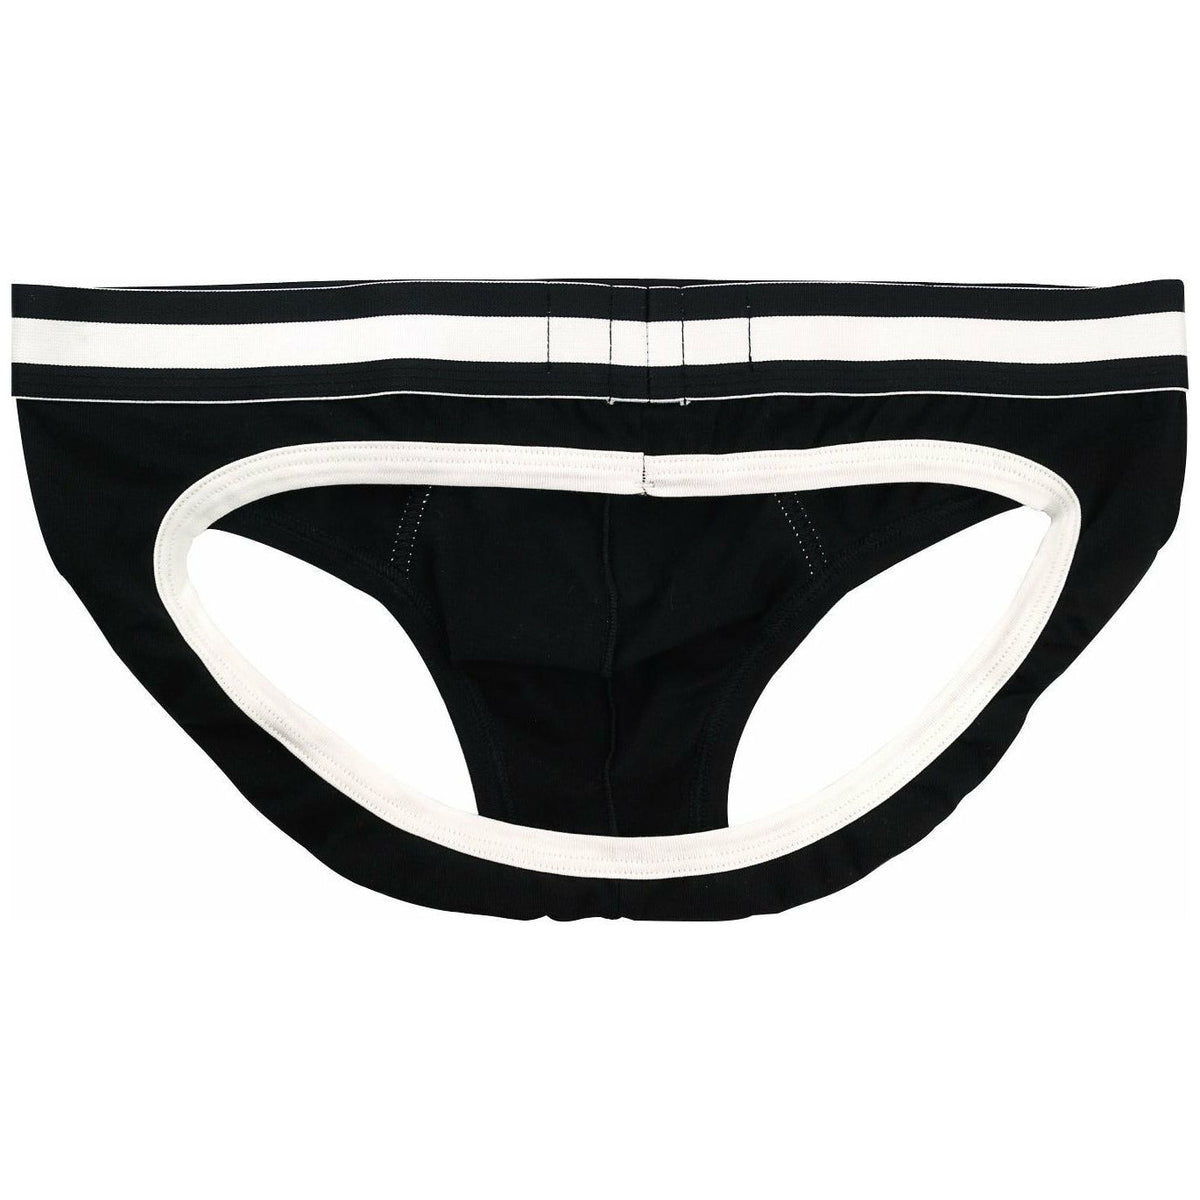 Prowler Classic Backless Brief – Black/White - Large